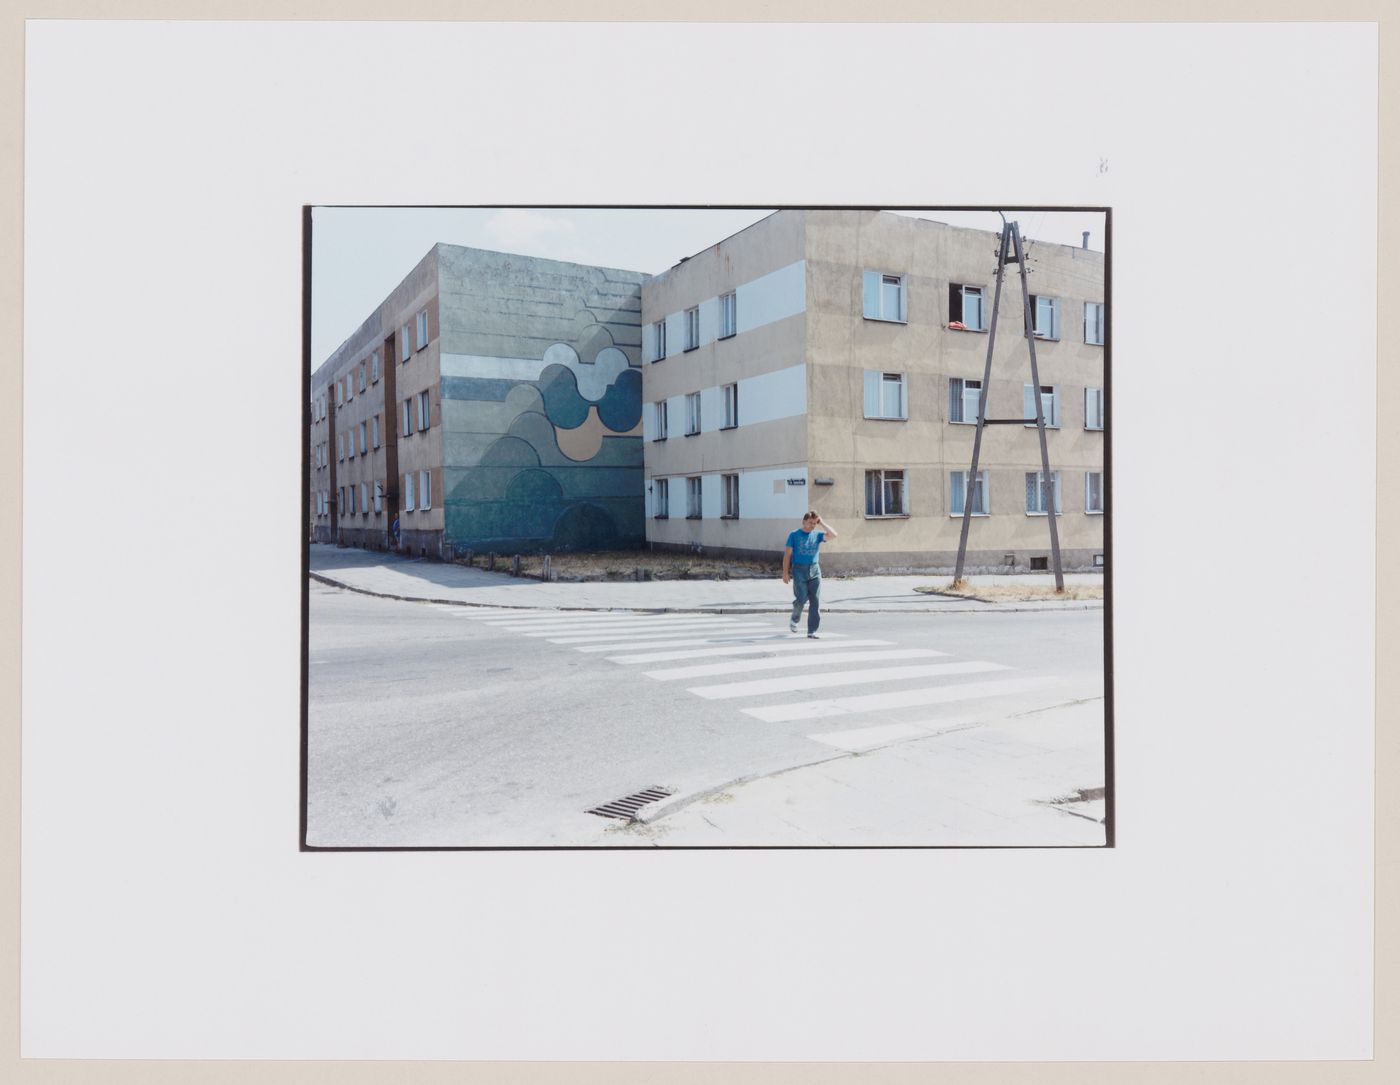 View of apartment houses and a man crossing a street, Gorzów Wielkopolski, Poland (from the series "In between cities")